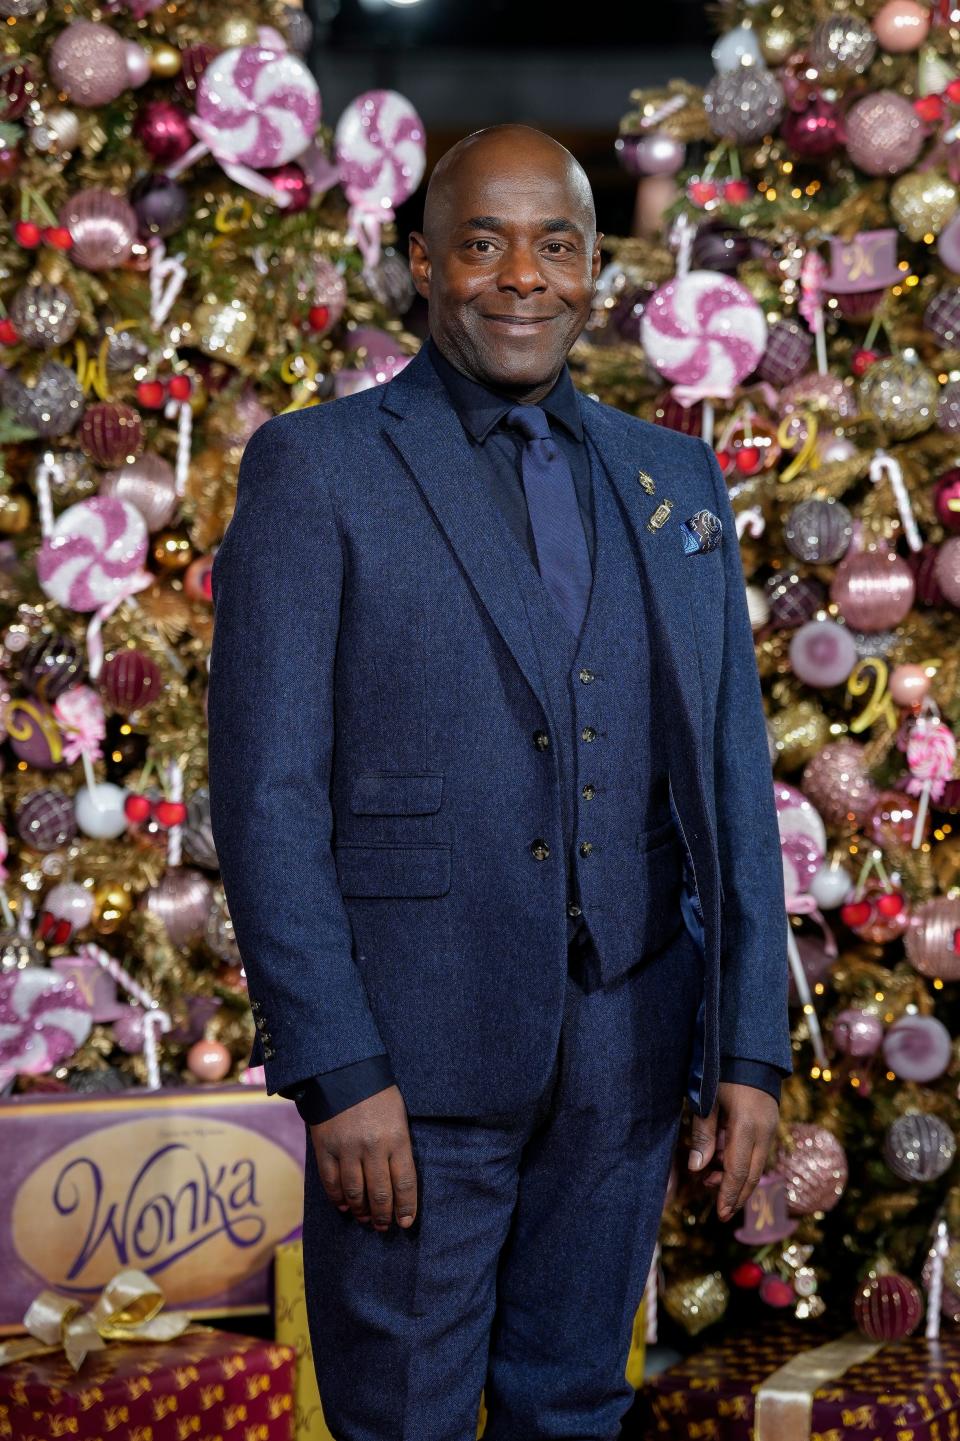 Paterson Joseph at the world premiere of "Wonka" in London.